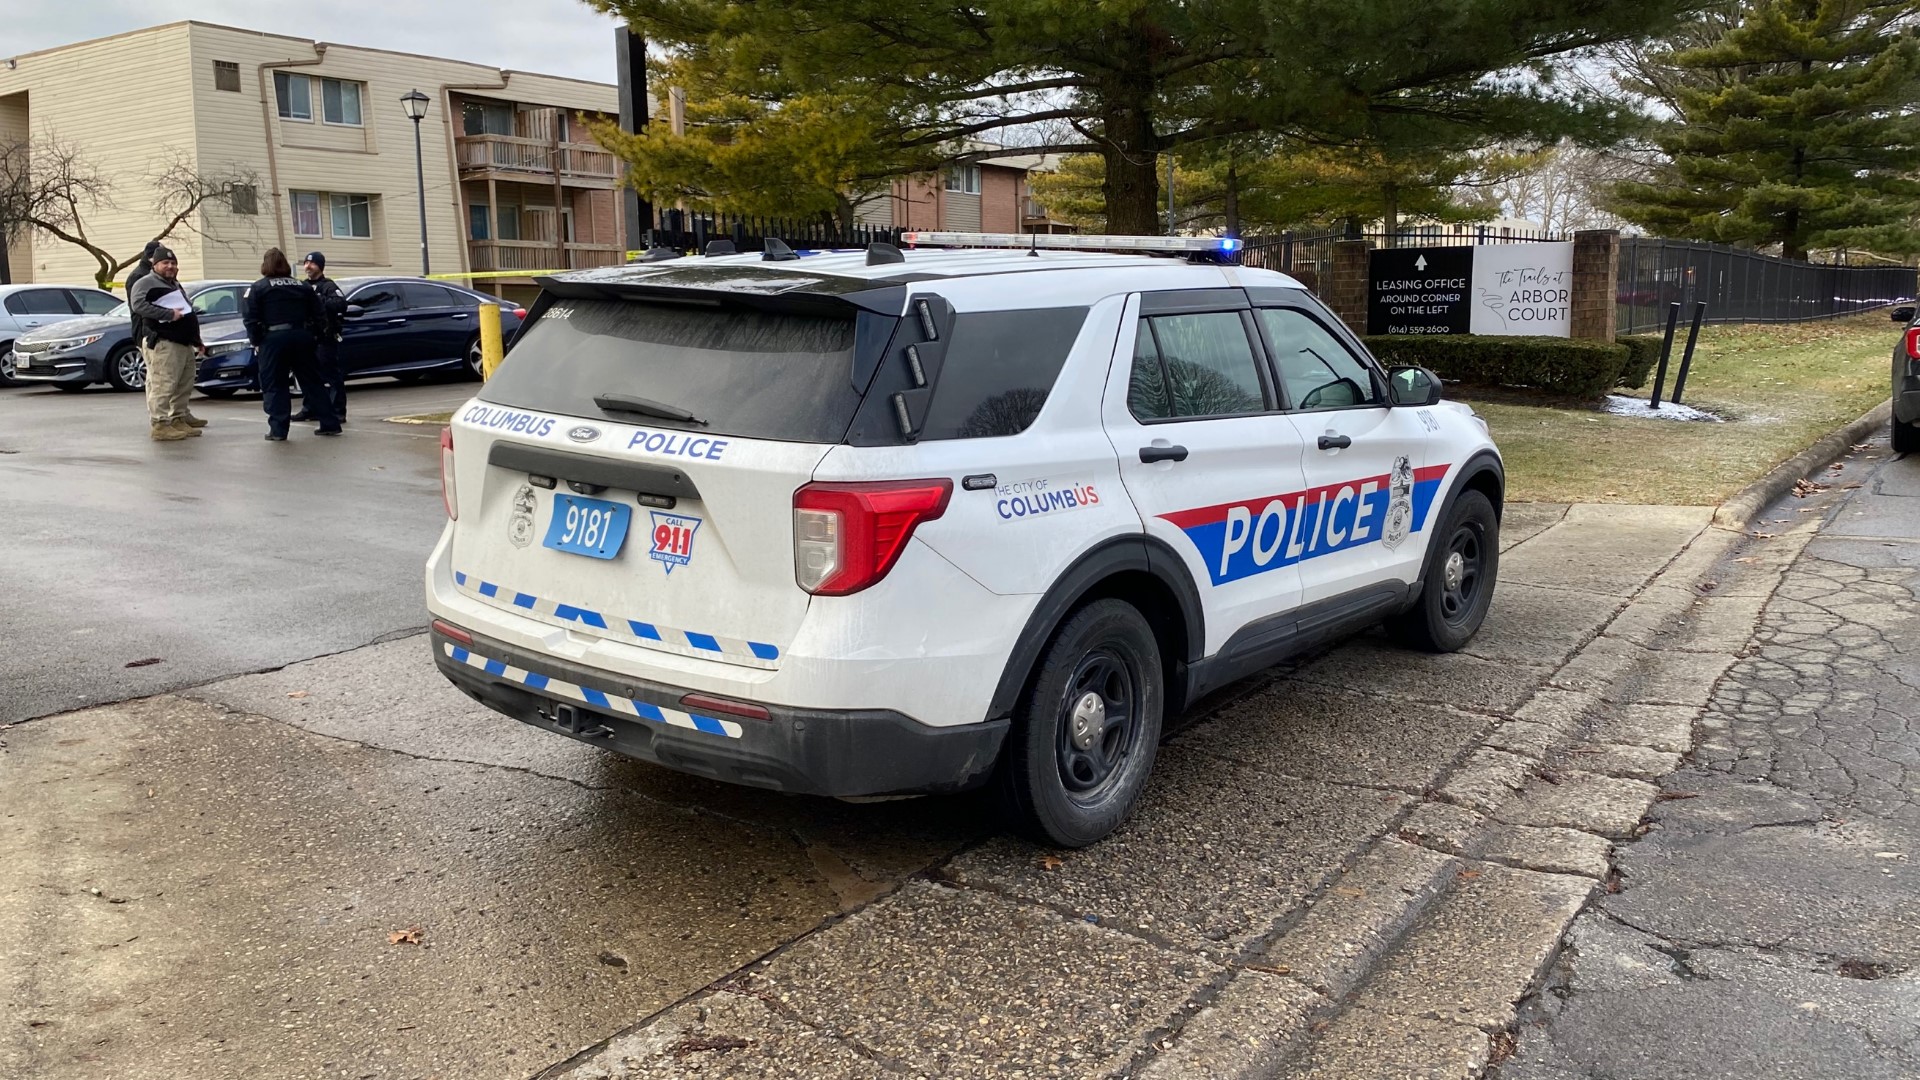 Police said that during the investigation, it was determined that 19-year-old Jevin Campbell intervened in the theft of a vehicle when the victim was shot.